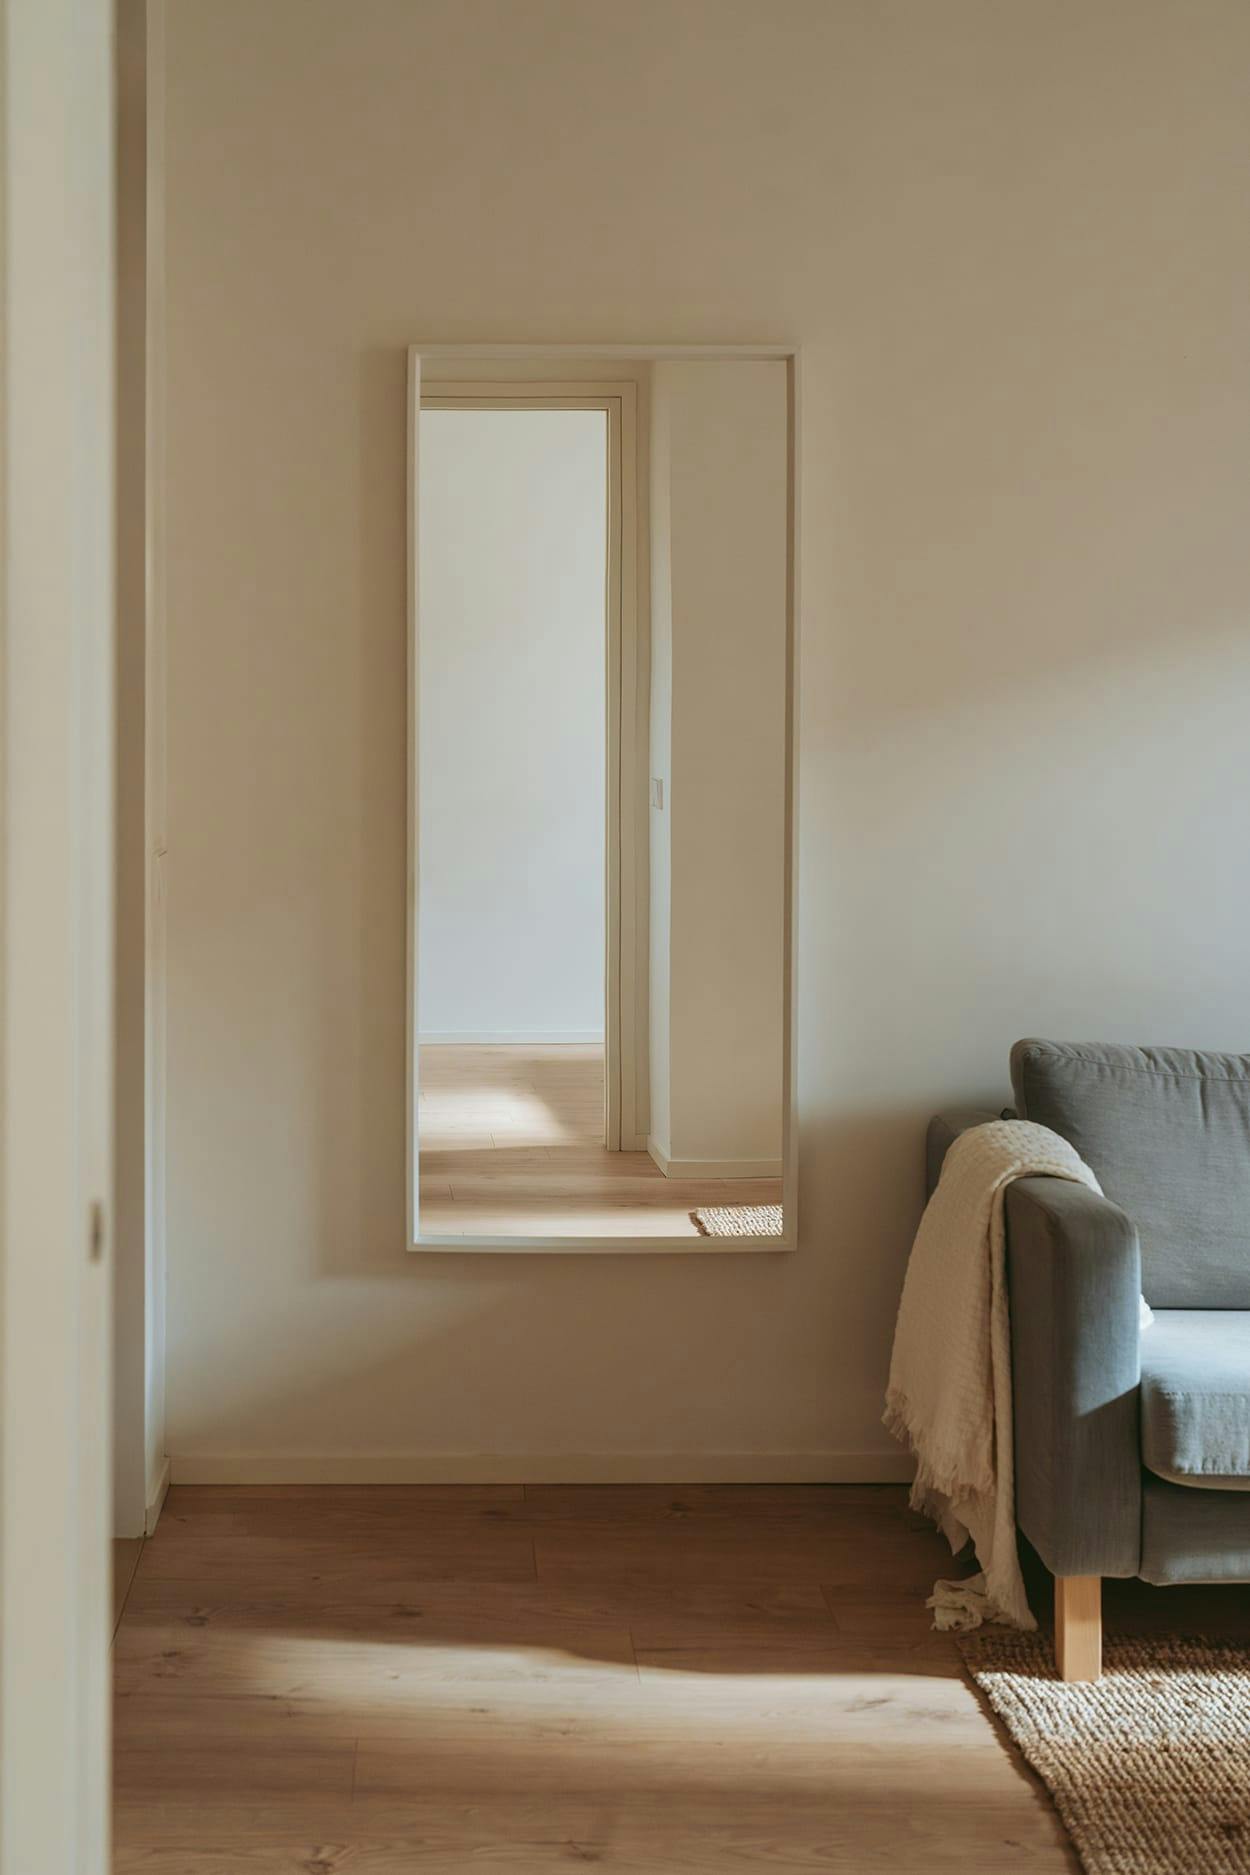 A small, clean, and empty room with a couch and a chair in the corner, a window with a view of the outside, and a doorway leading to another room.